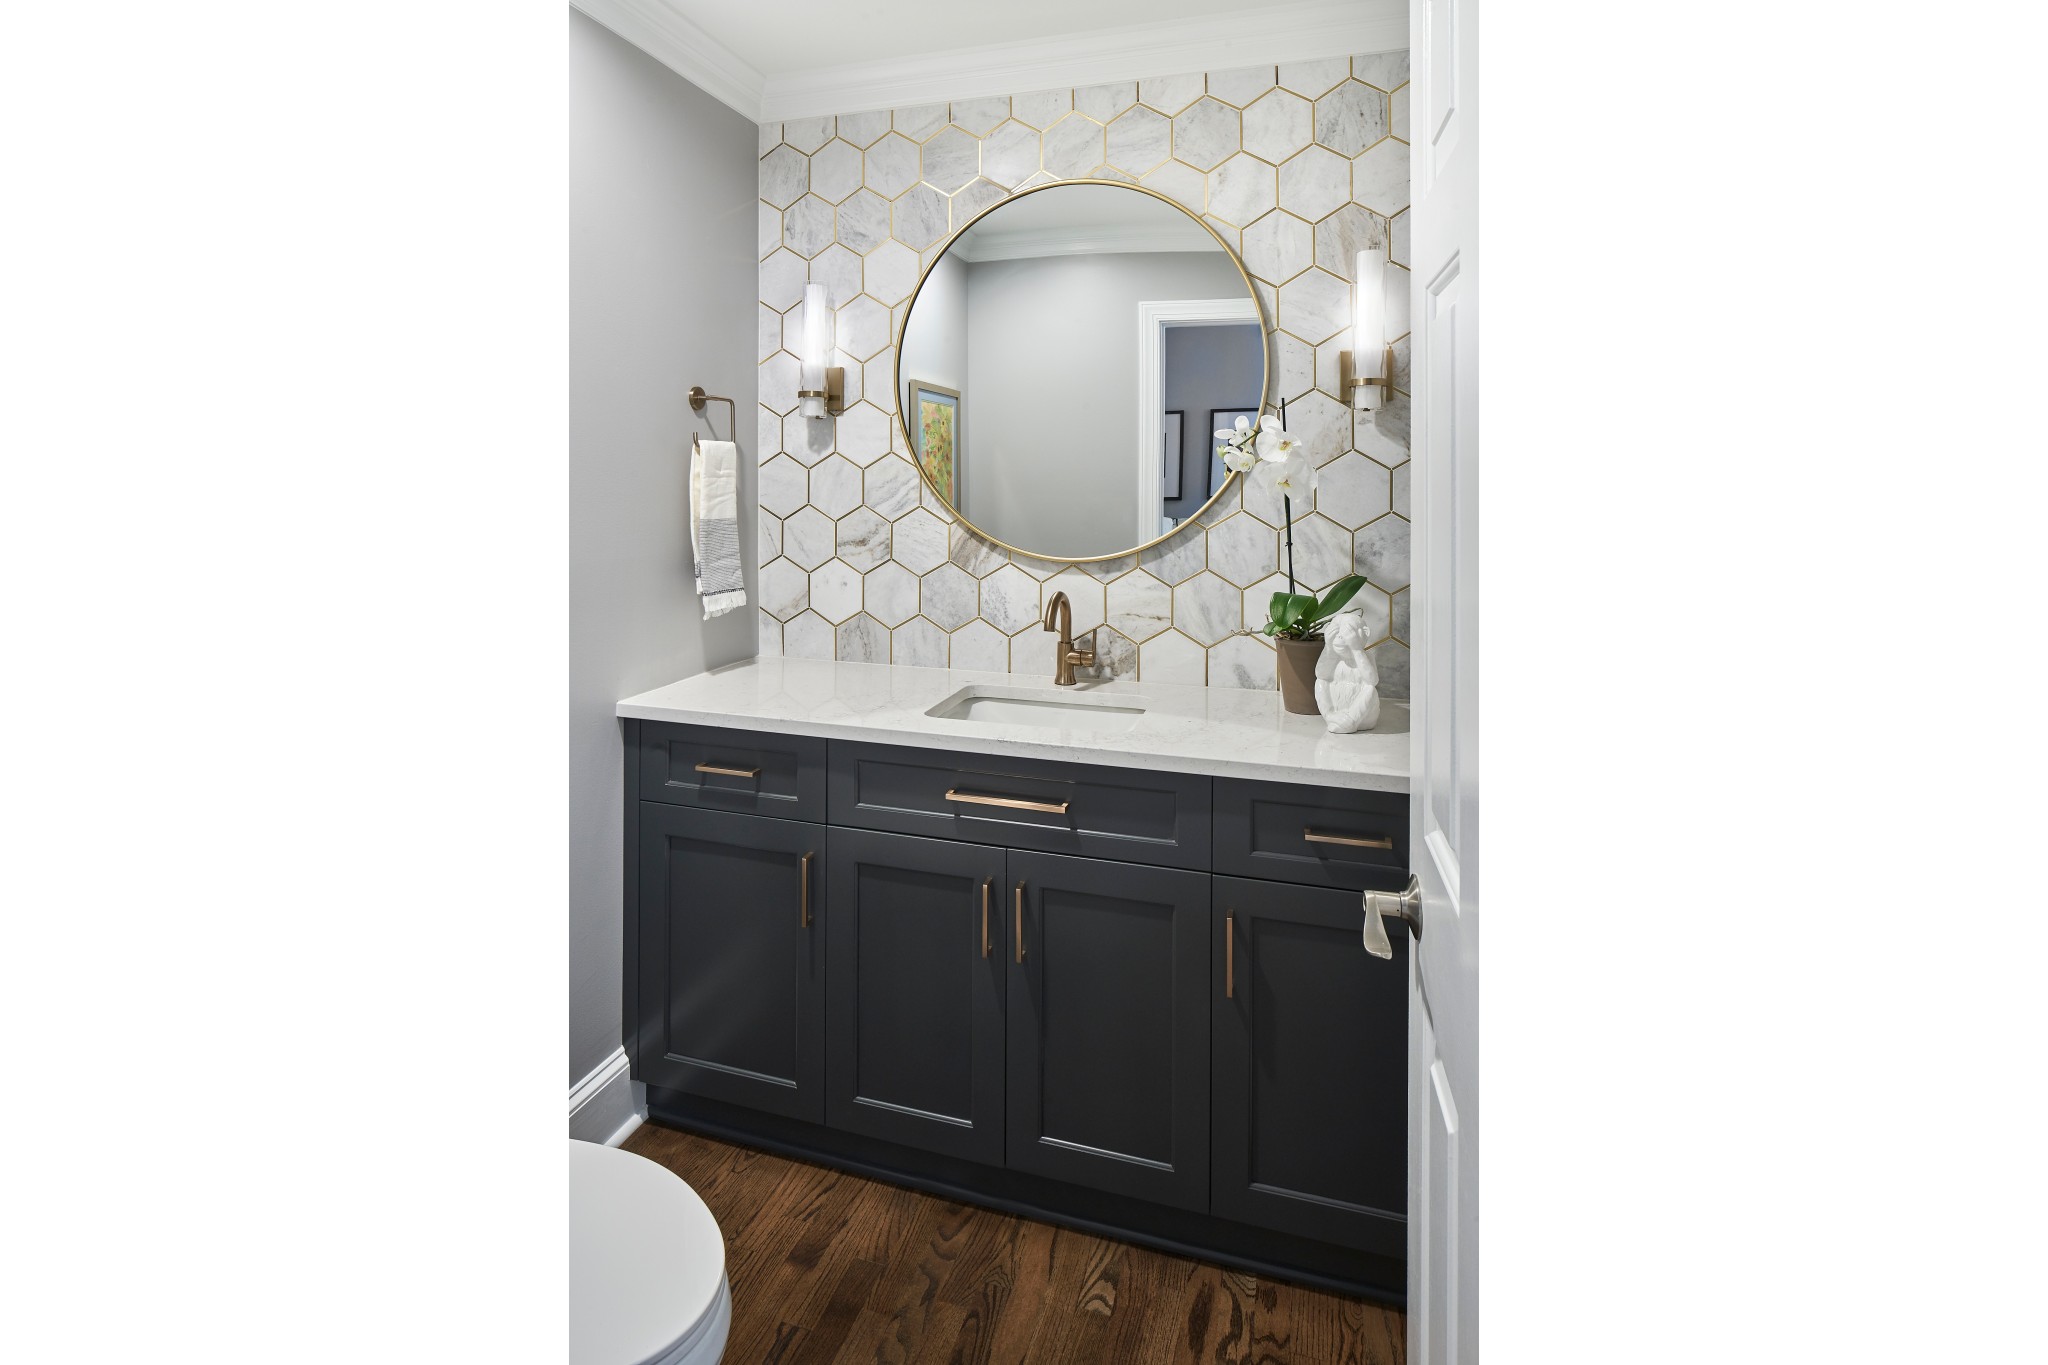 Updated bathroom with navy vanity and gold-accented mirror and backsplash